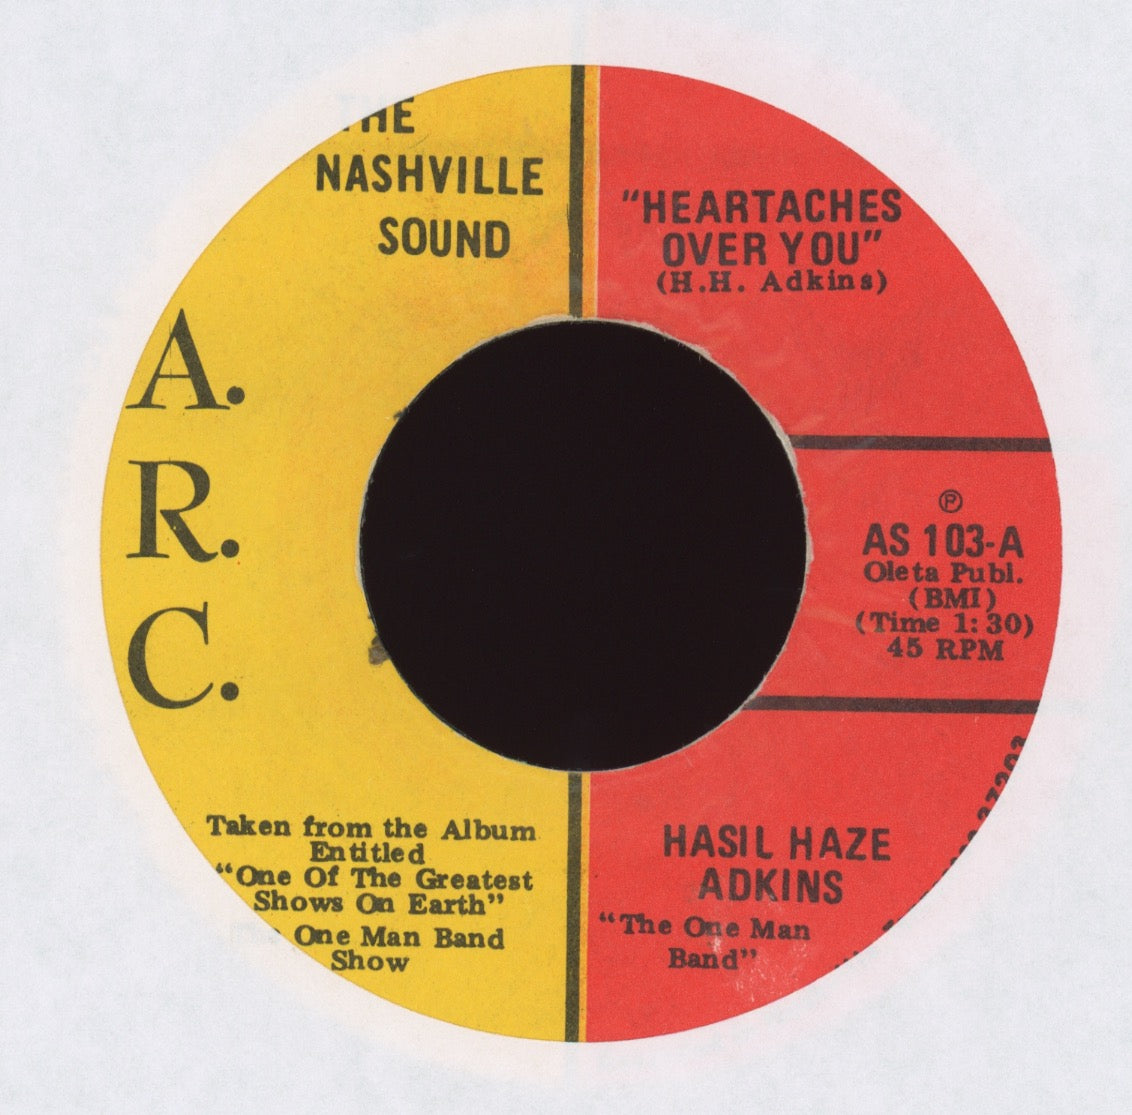 Hasil Adkins - Heartaches Over You on A.R.C.